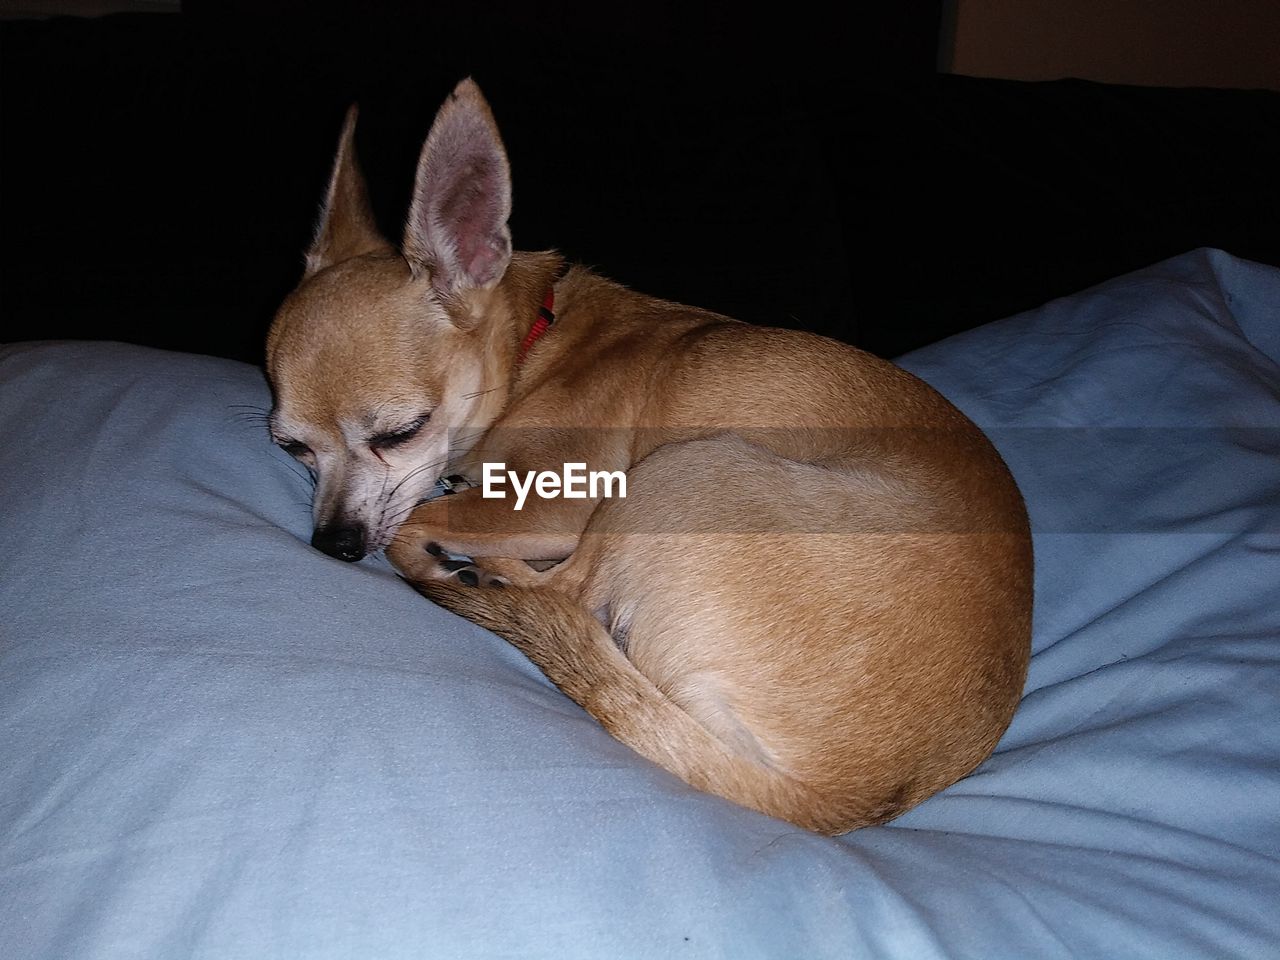 3lbs 3/4 oz deer type chihuahua napping.on my pillow.